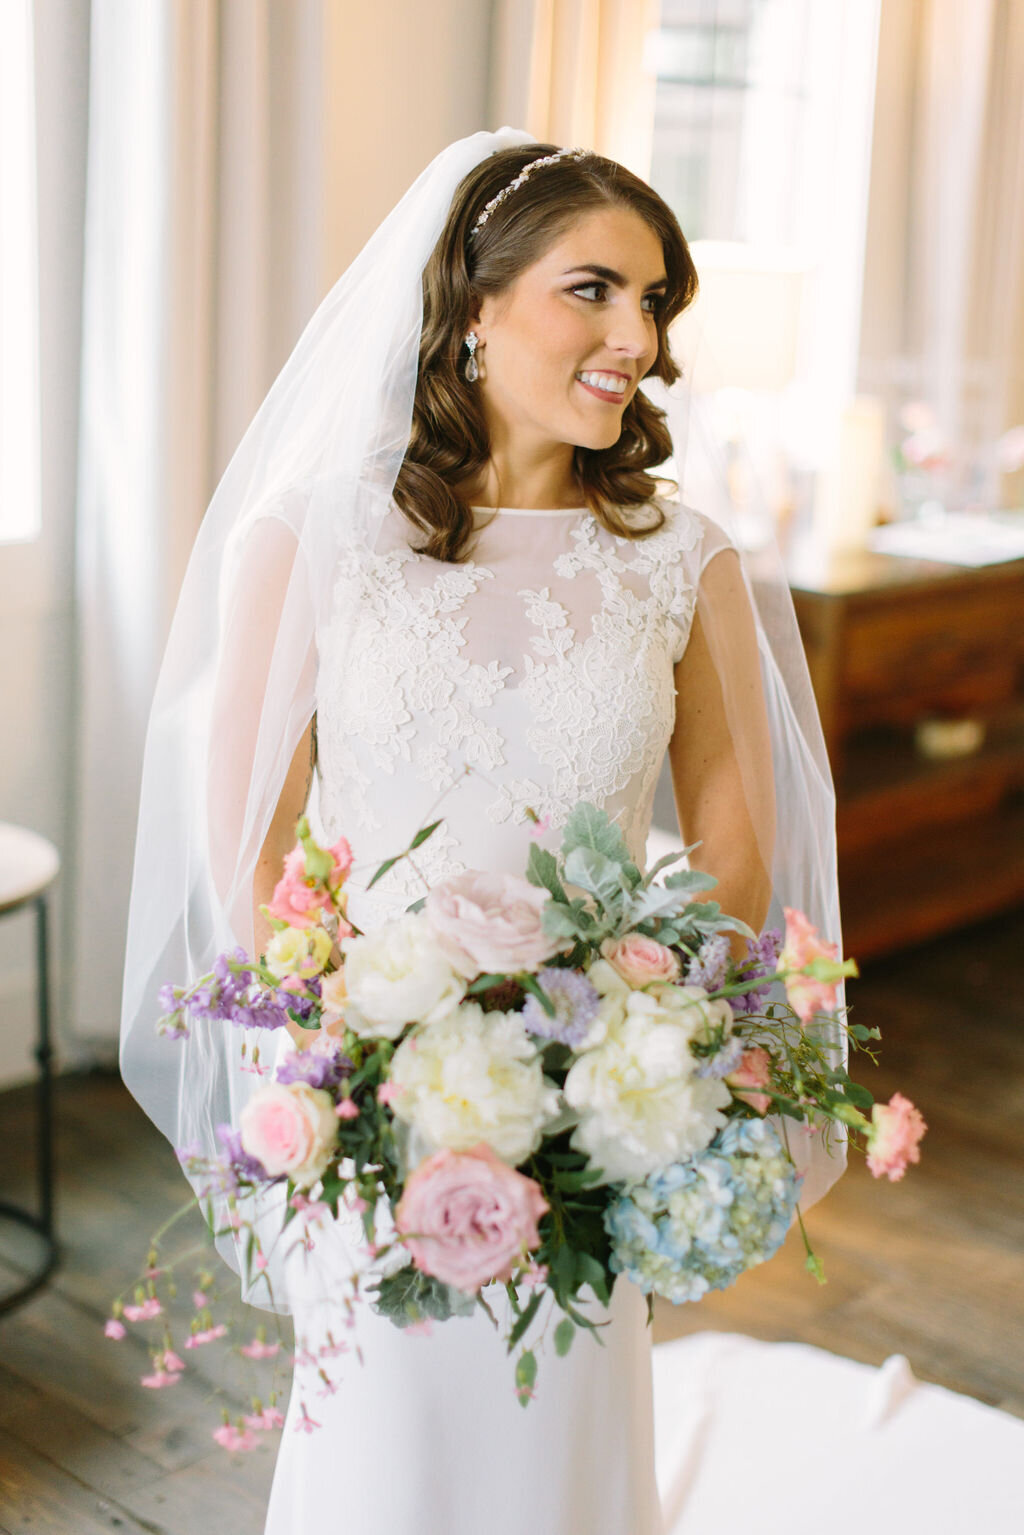 Bride in white gown with pink and purple flower bouquet